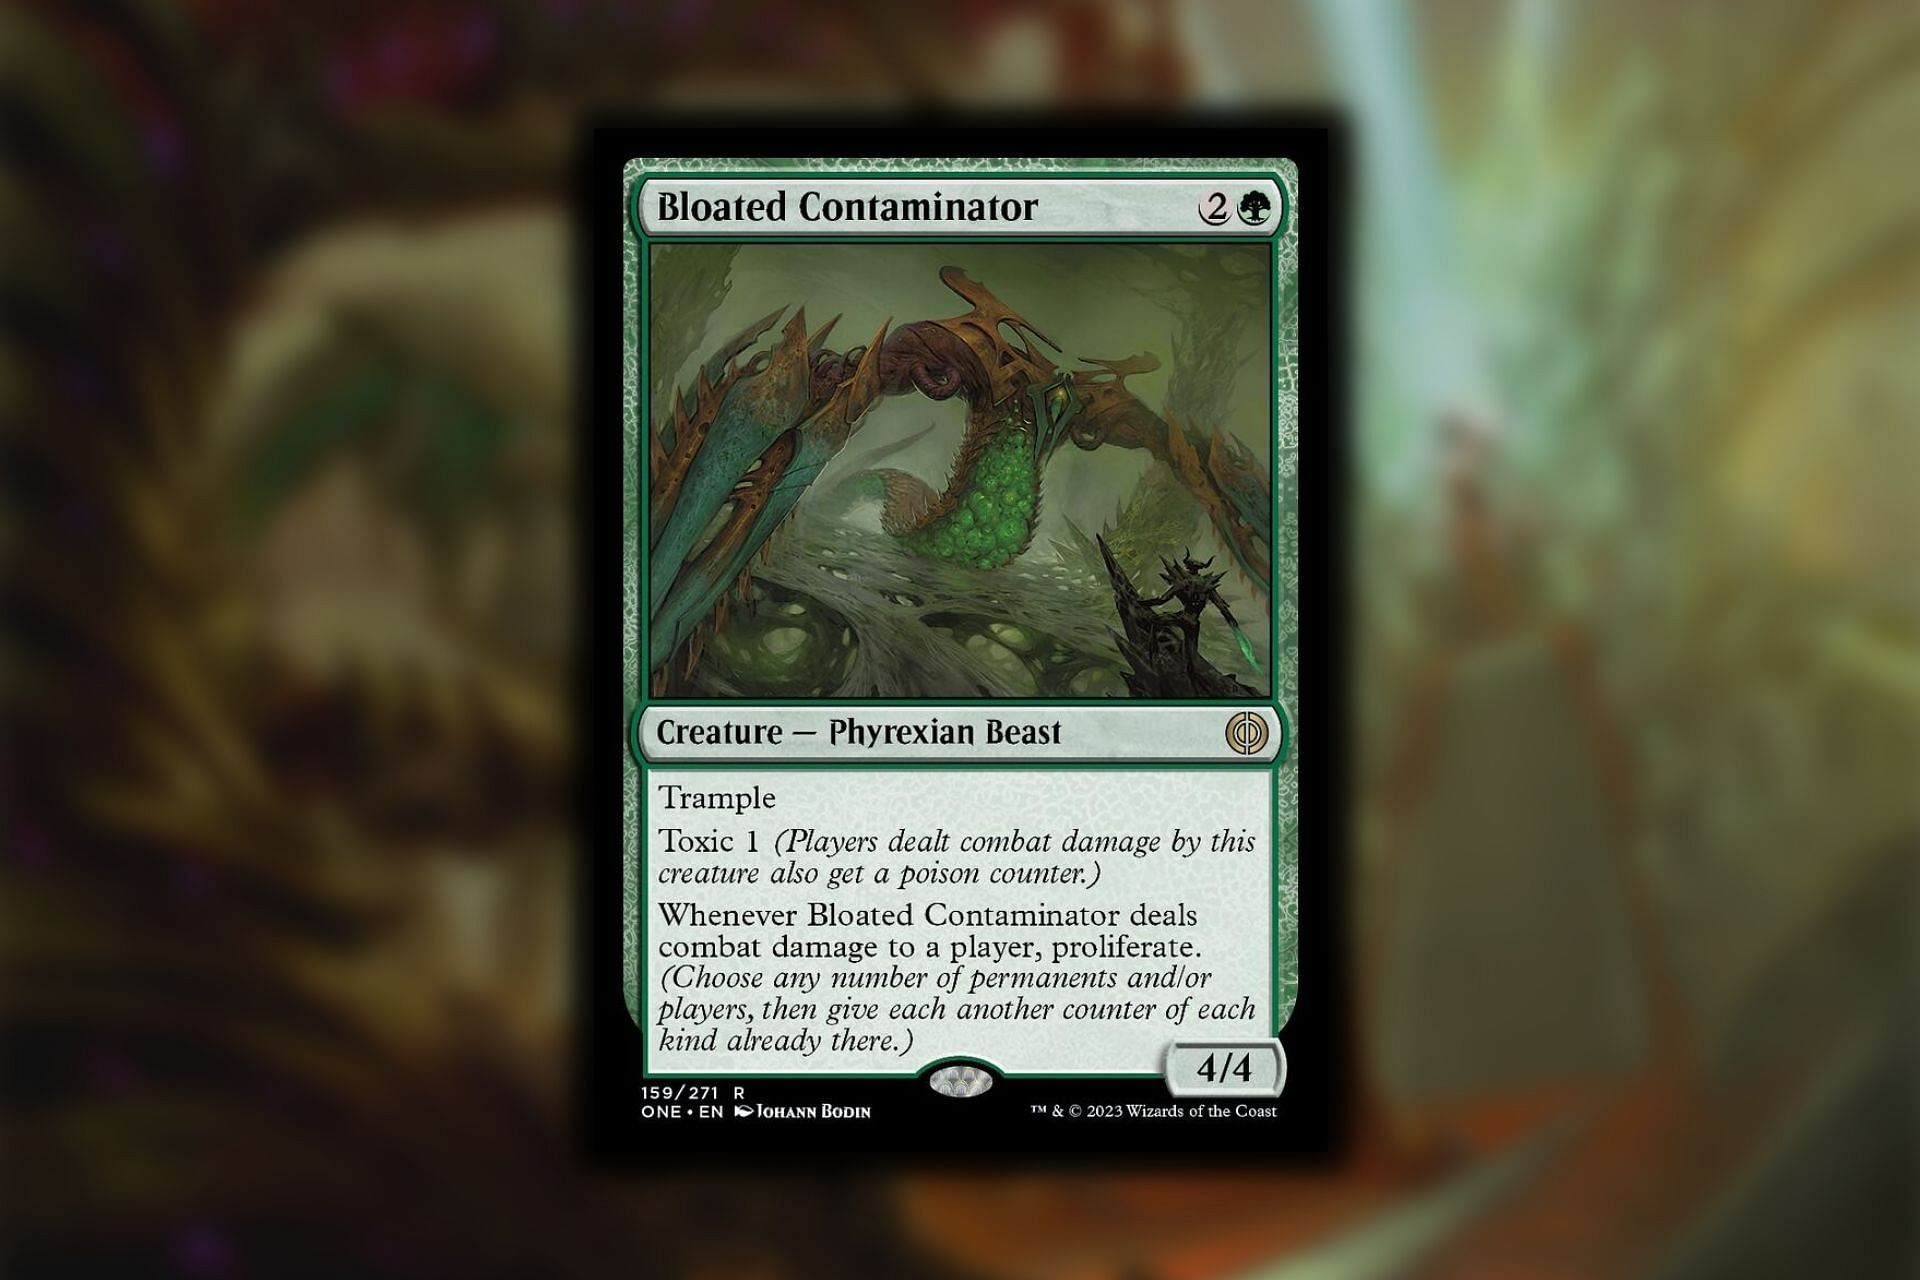 Bloated Contaminator is an absolutely bonkers card.